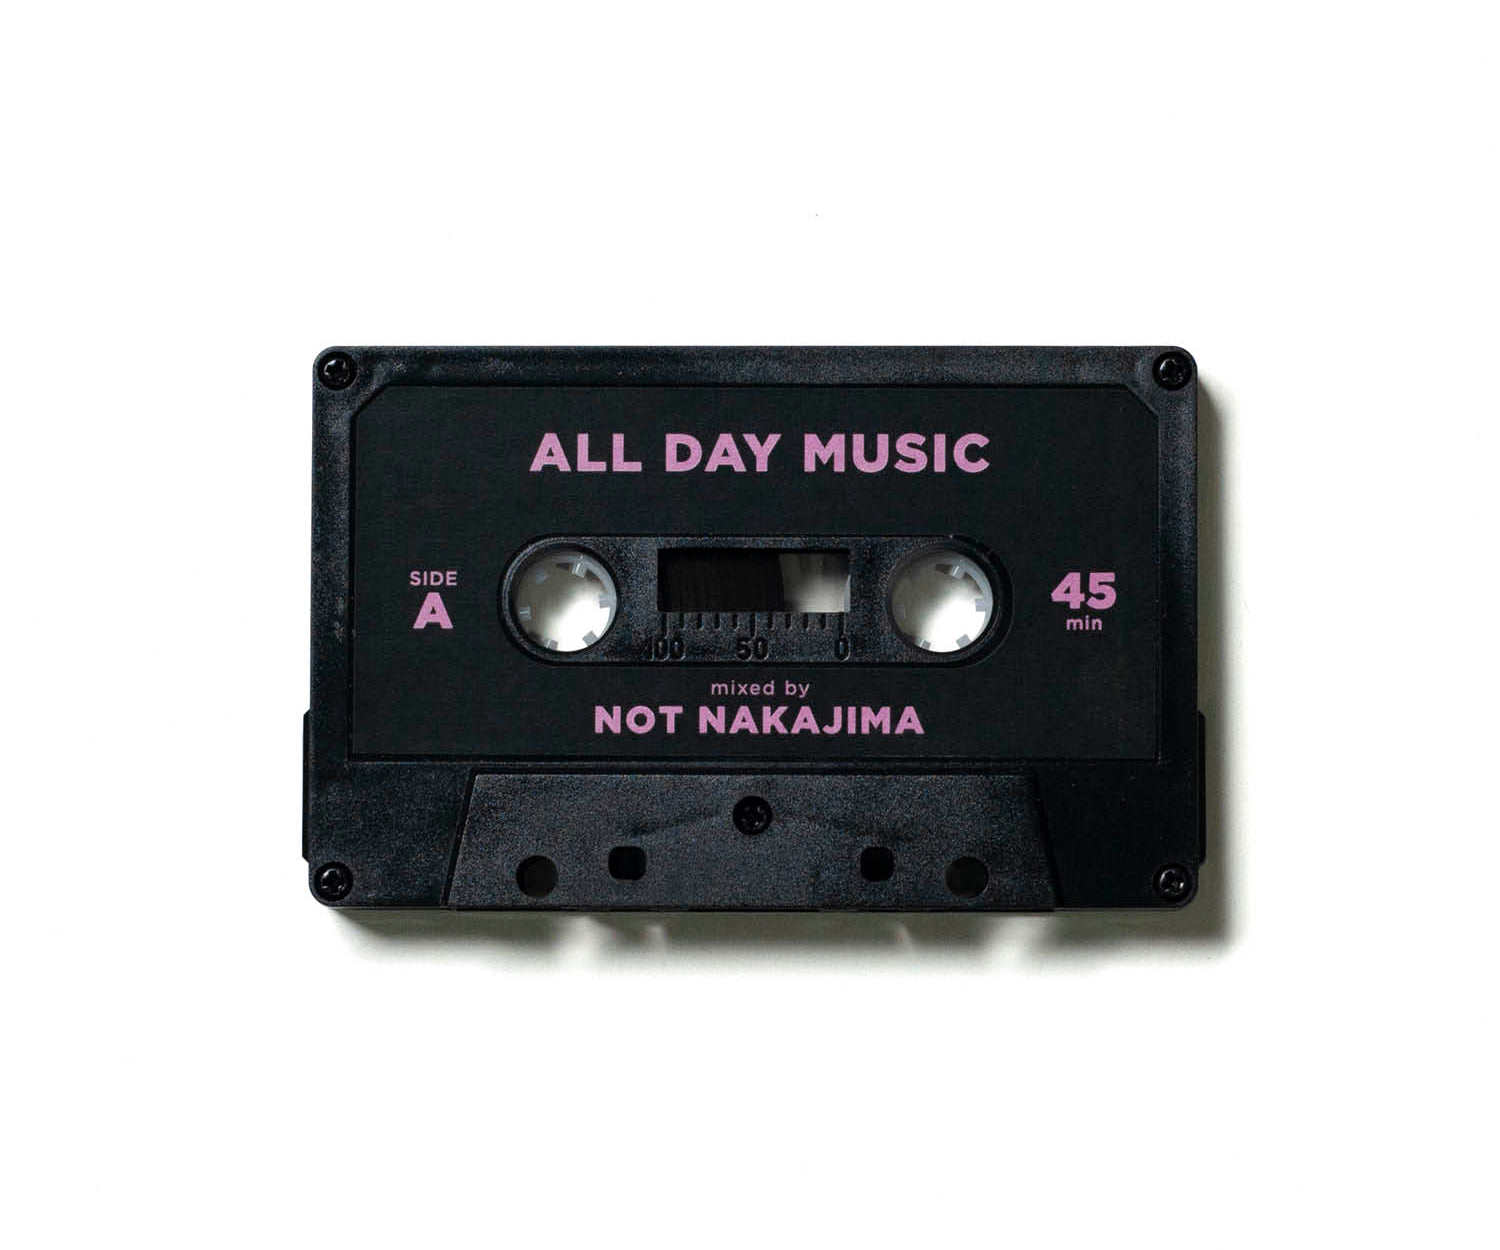 A.D.M. #11 - Mixed by NOT NAKAJIMA | LIKE THIS SHOP